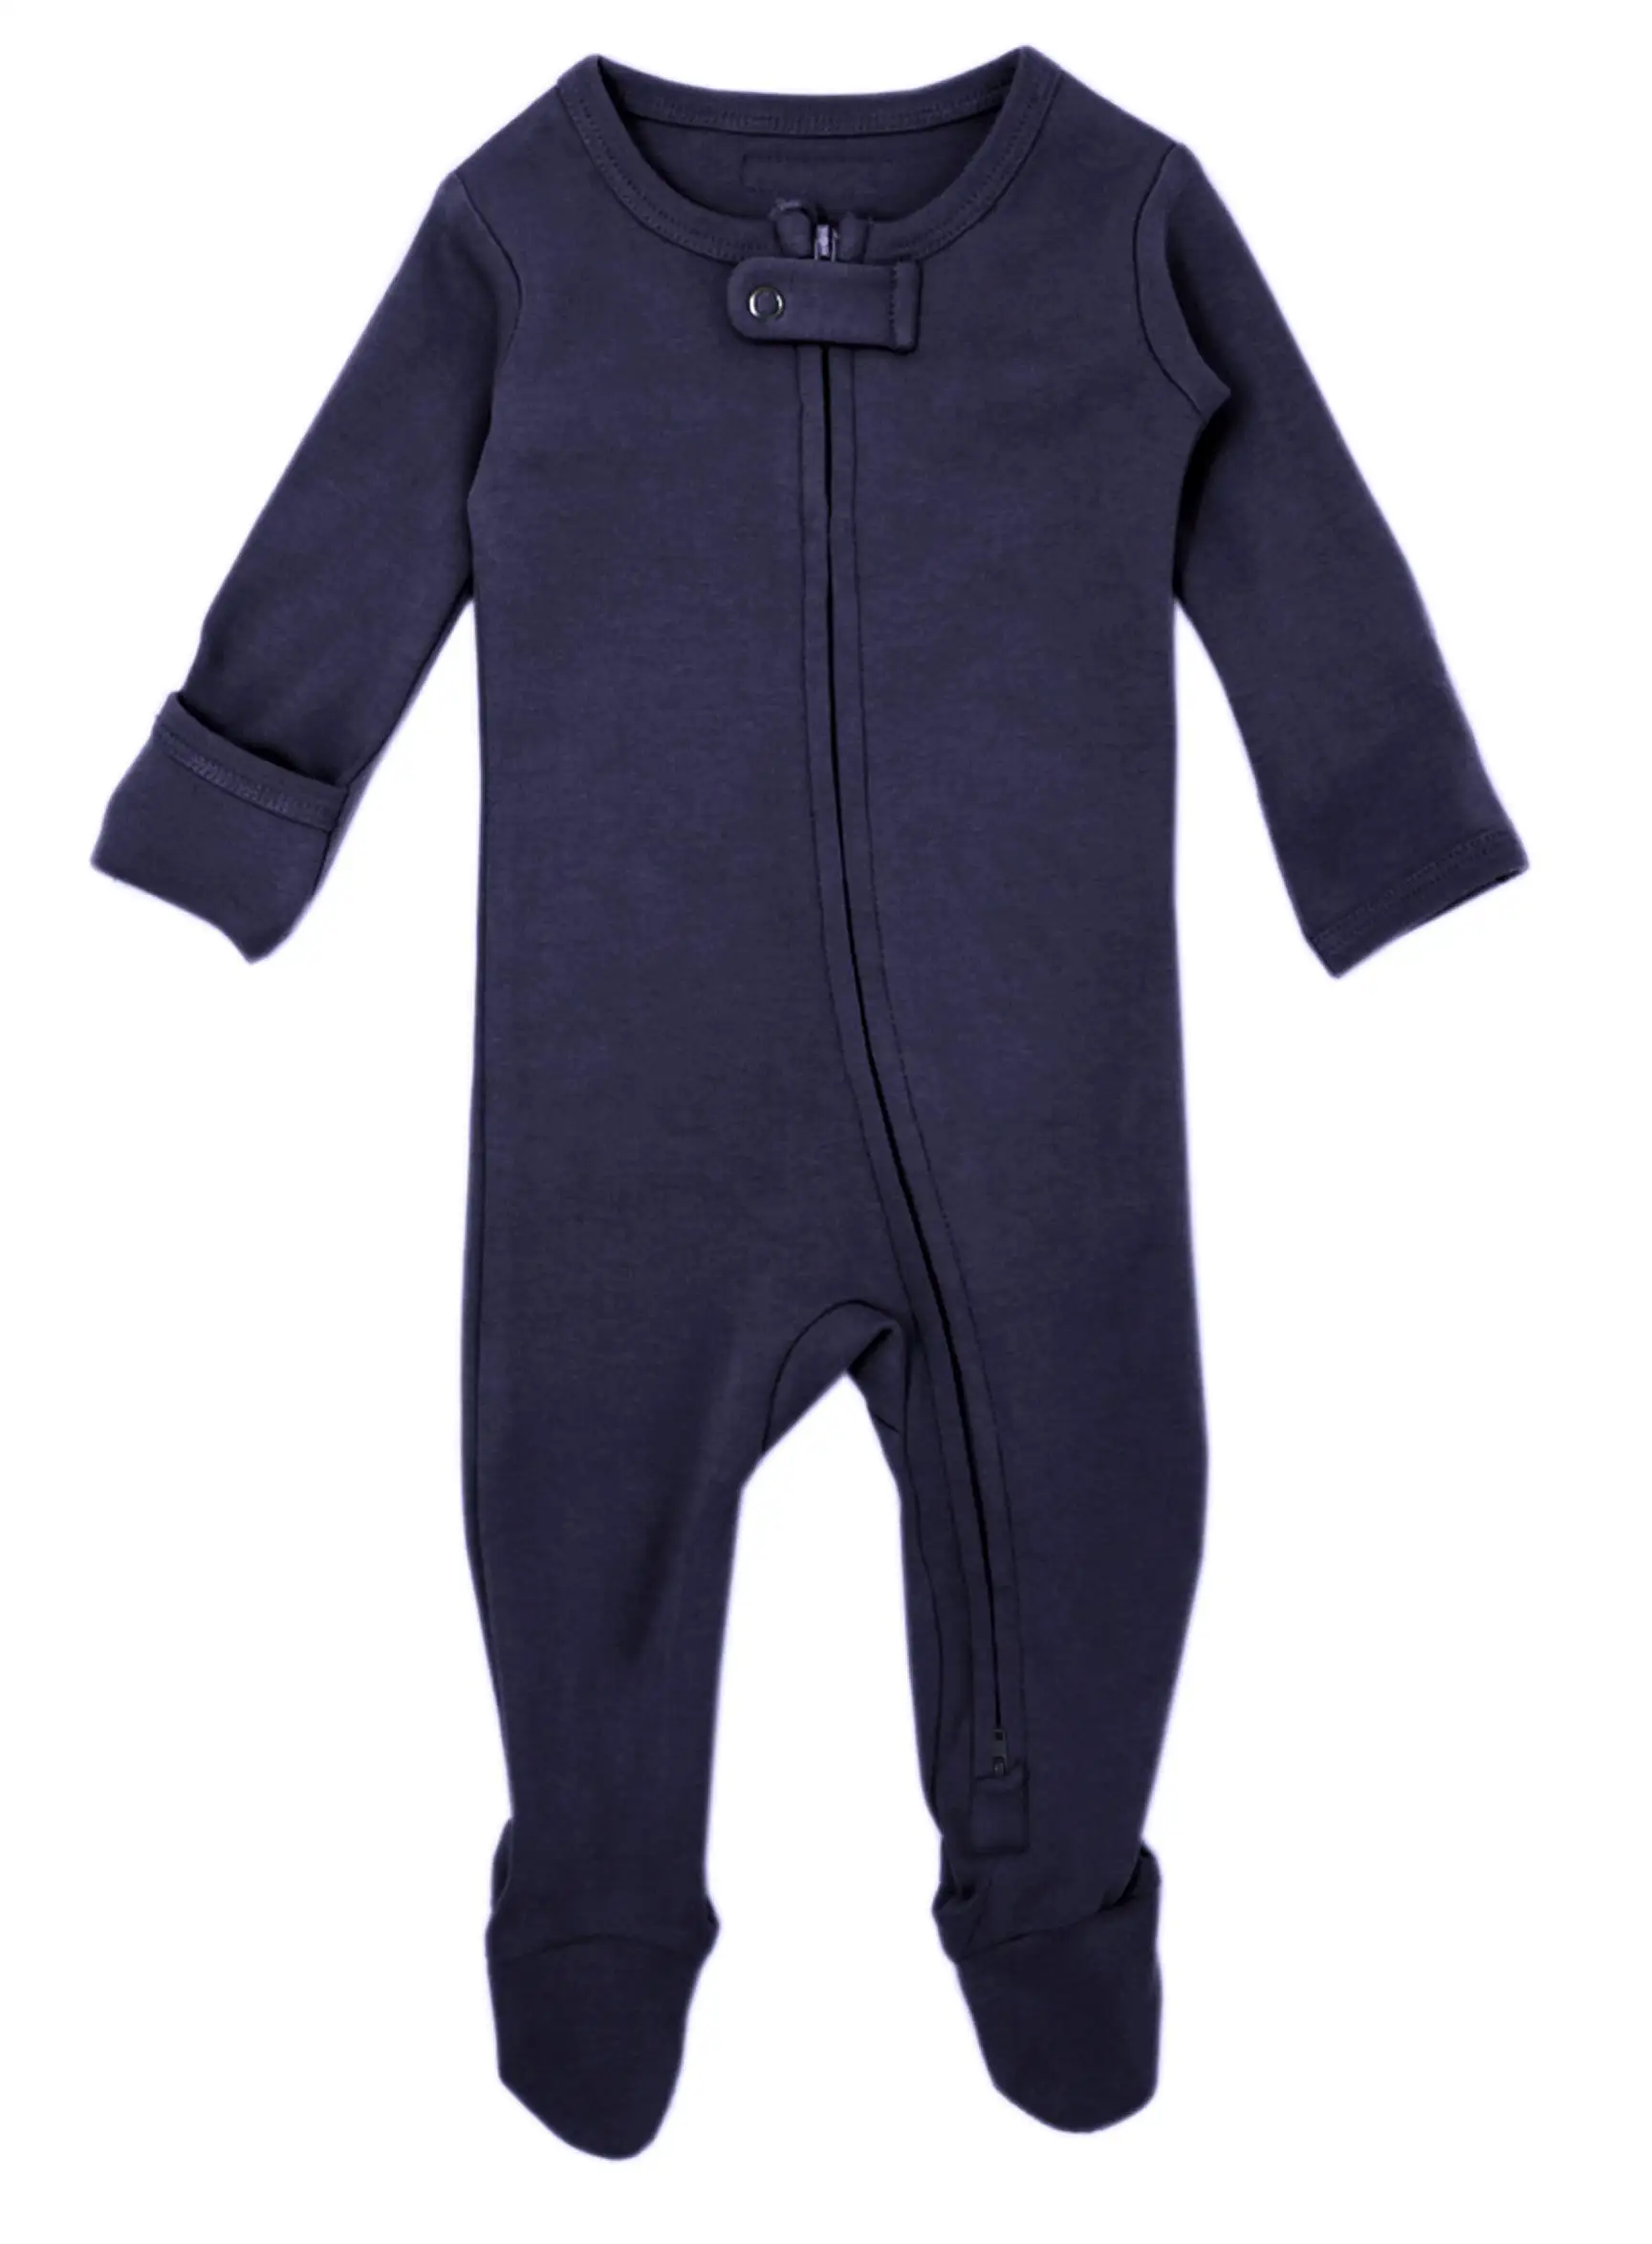 Pajamas For Toddlers Made Of Soft Bamboo Rayon Material New Style ...